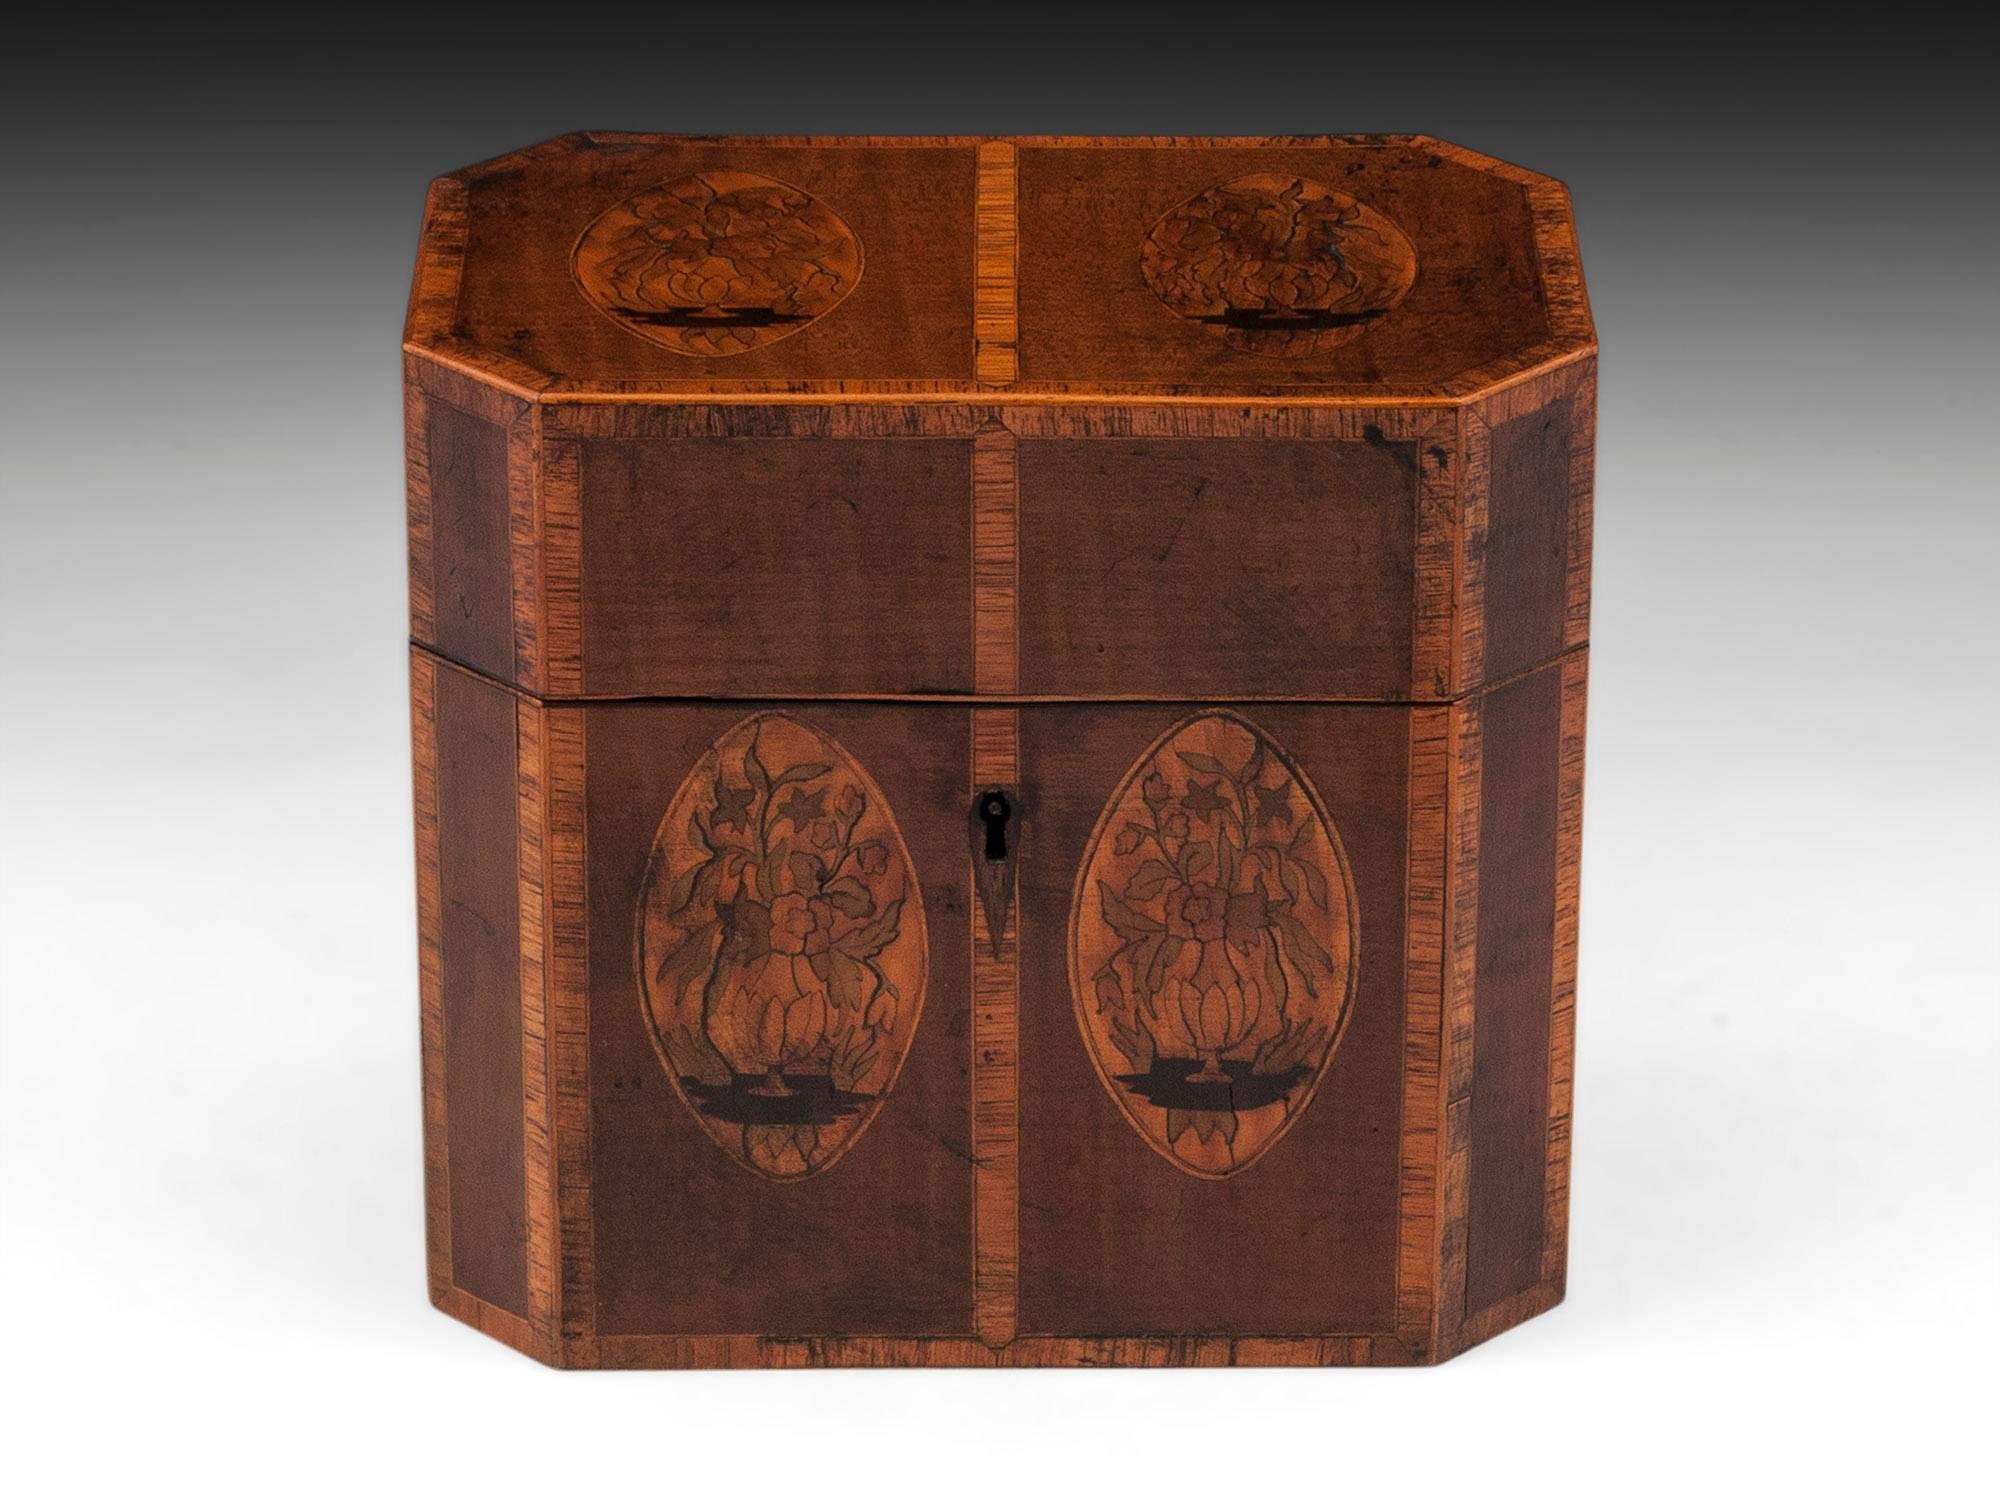 Antique tea chest veneered in harewood with decorative oval medallions of tea plants to the front and top, framing each panel of the chest is a Tulipwood crossbanding with box wood either side. 

The tea chest interior features two engraved